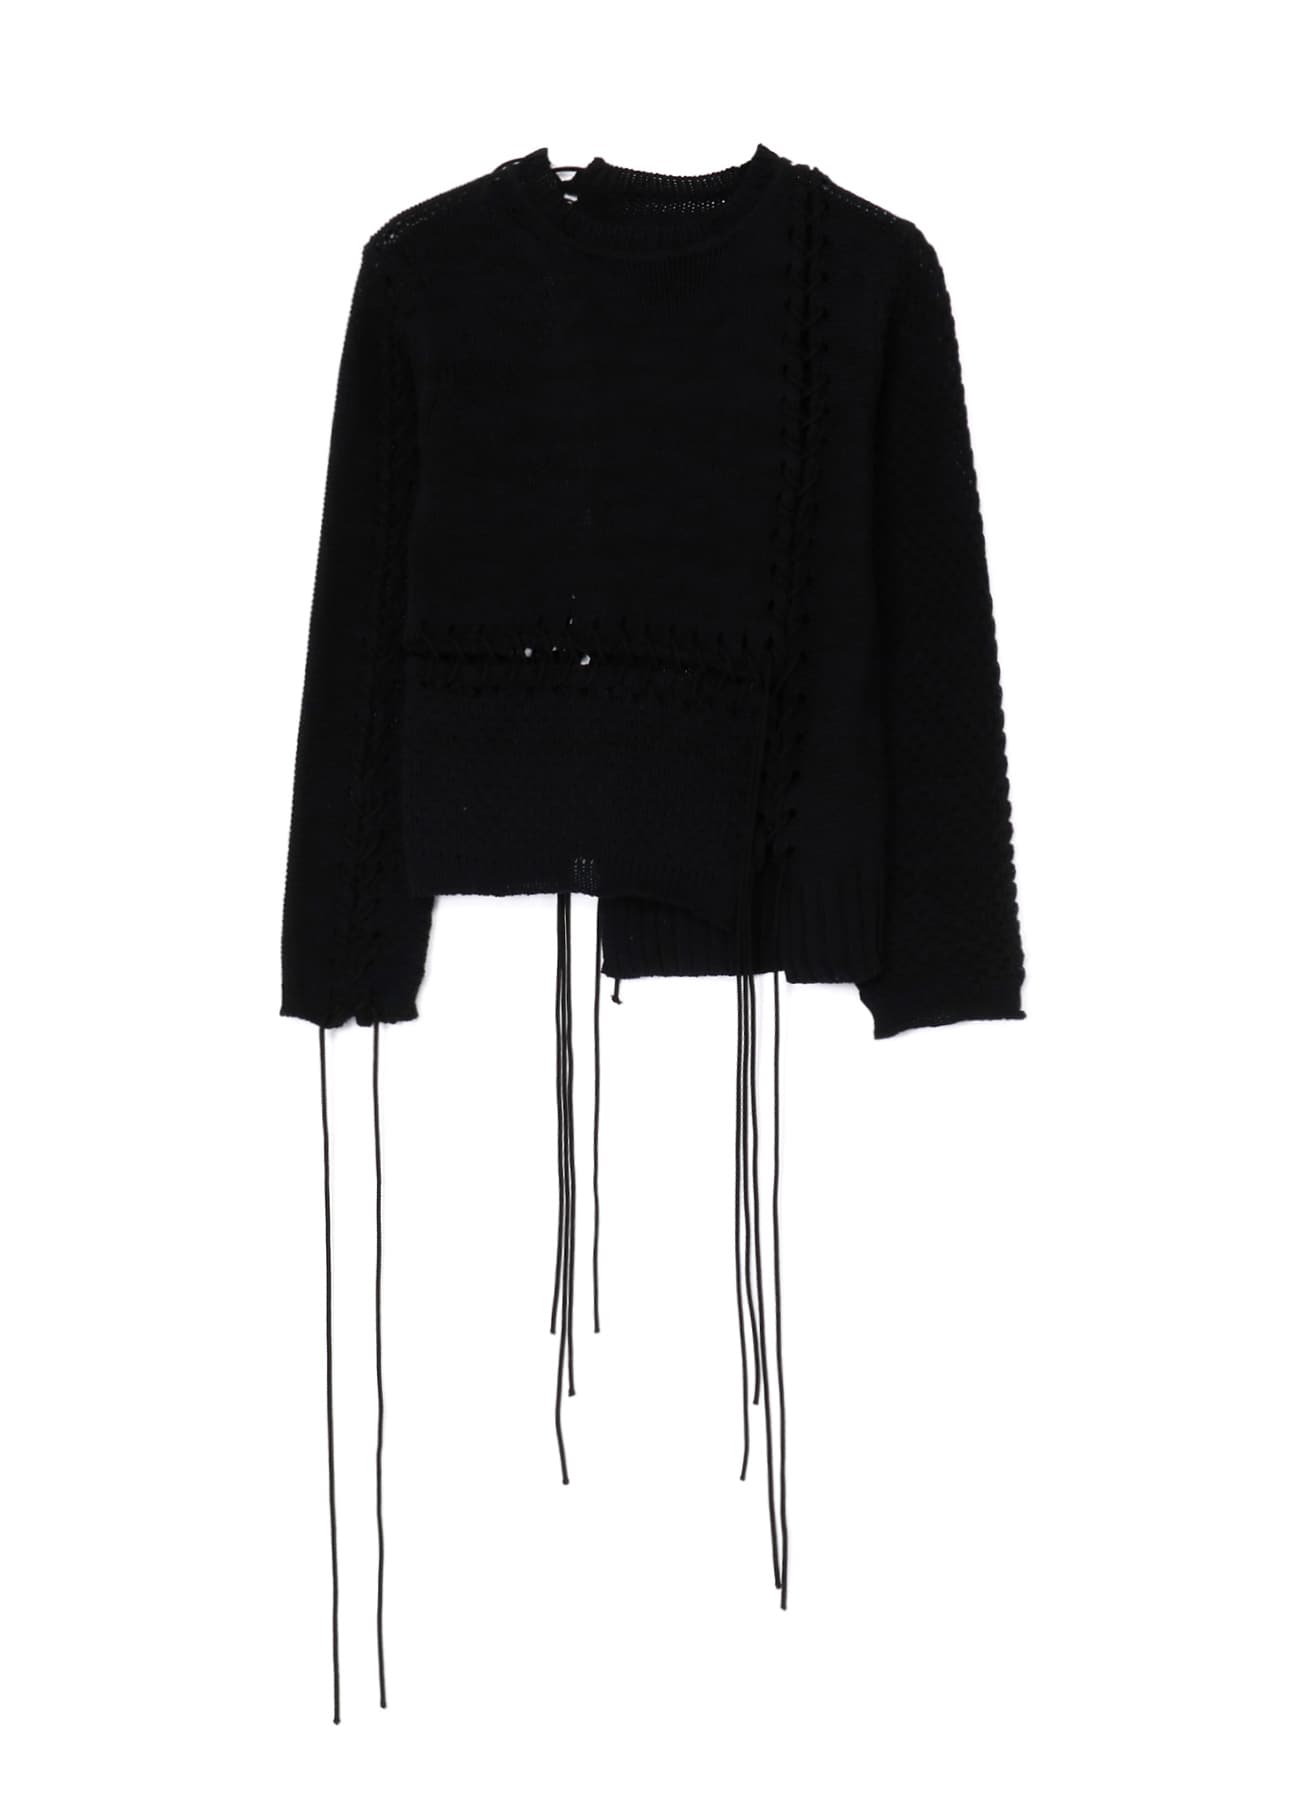 TUCK JERSEY LACE UP SHORT PULLOVER(S Black): Y's｜THE SHOP YOHJI